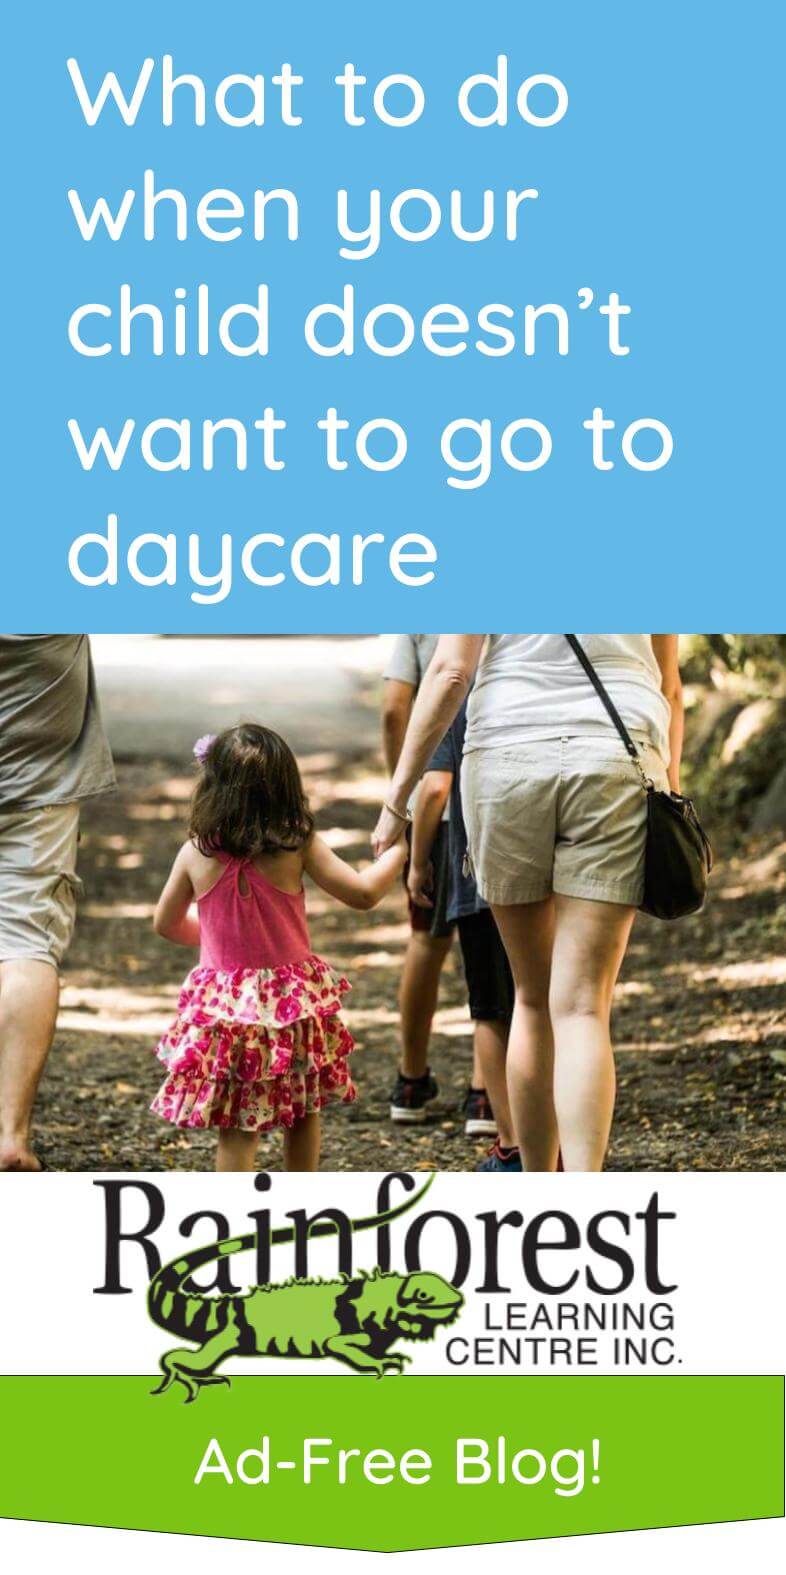 What to do when your child doesn’t want to go to daycare article - pinterest image